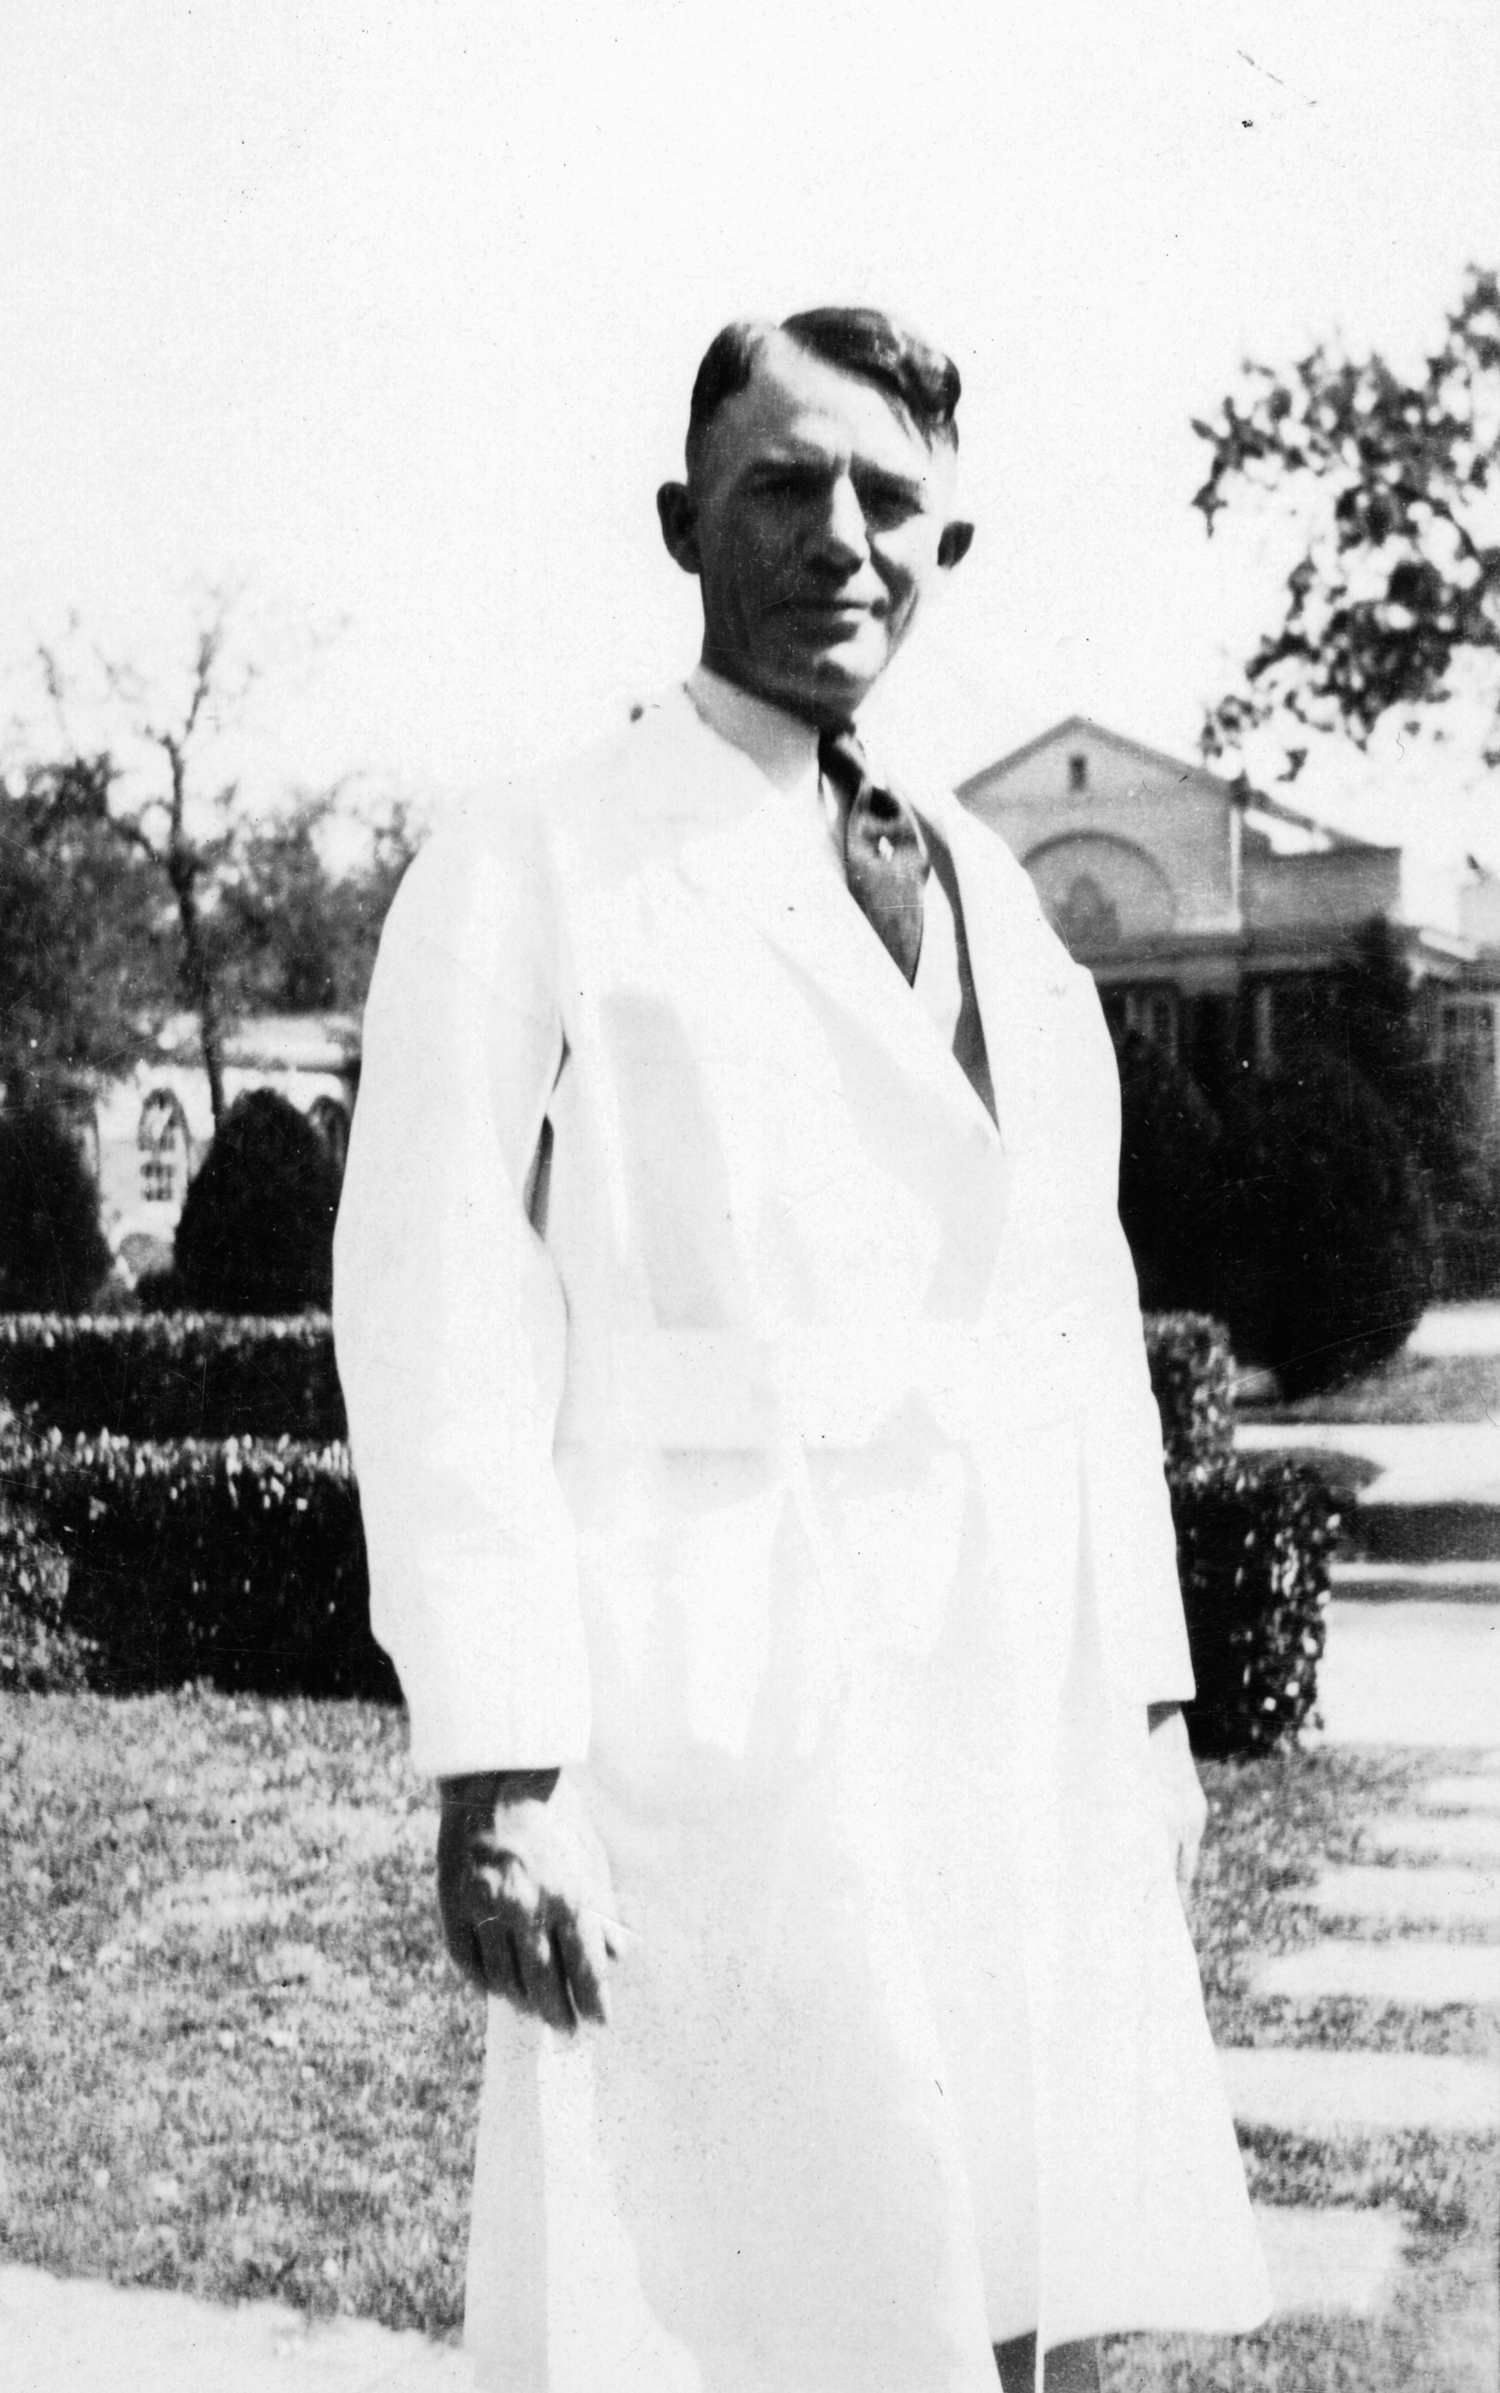 Dr. Carrell standing outside in white lab coat.